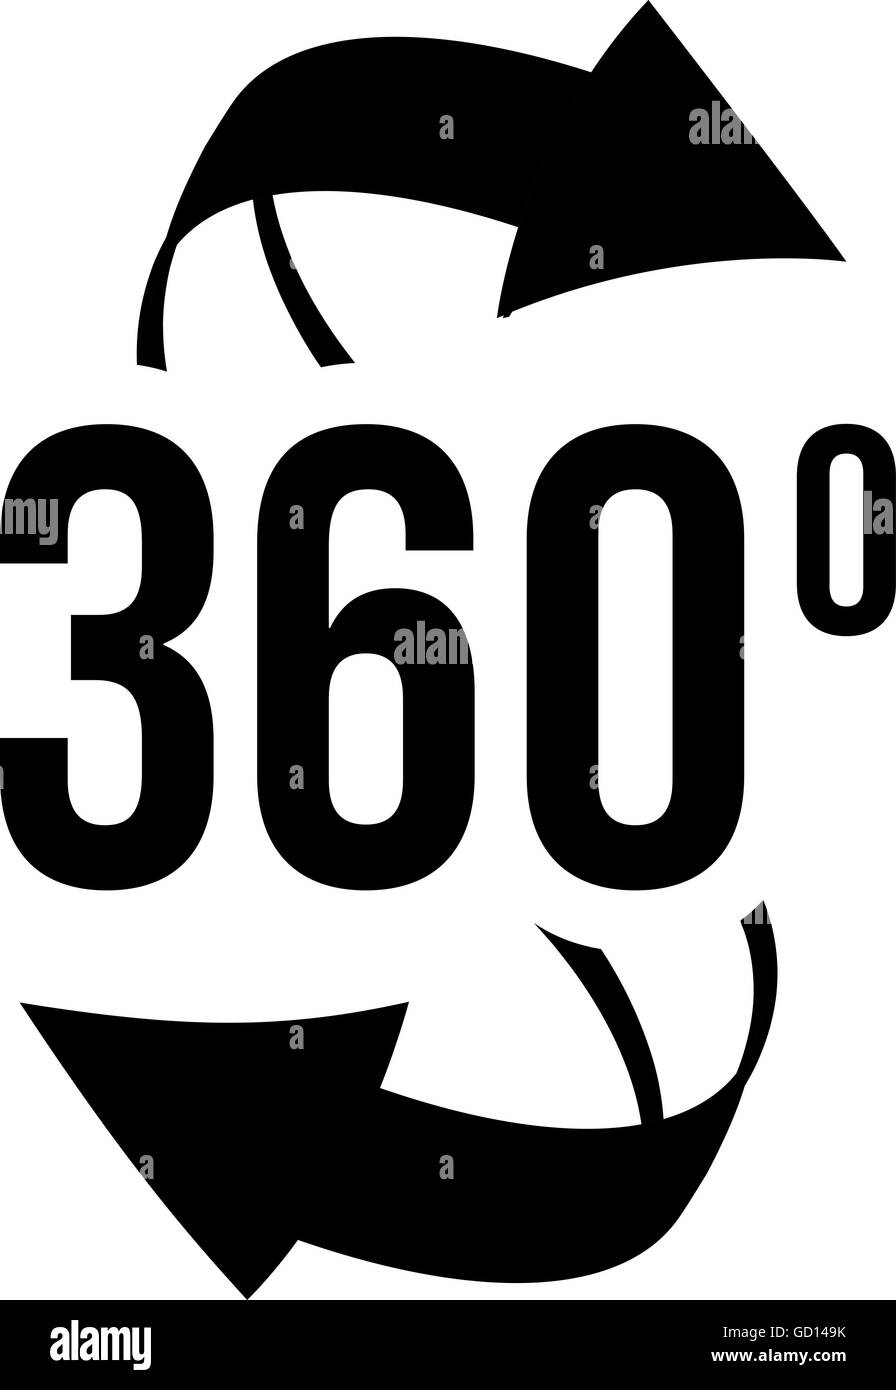 Angle 360 degrees view sign icon. Stock Vector